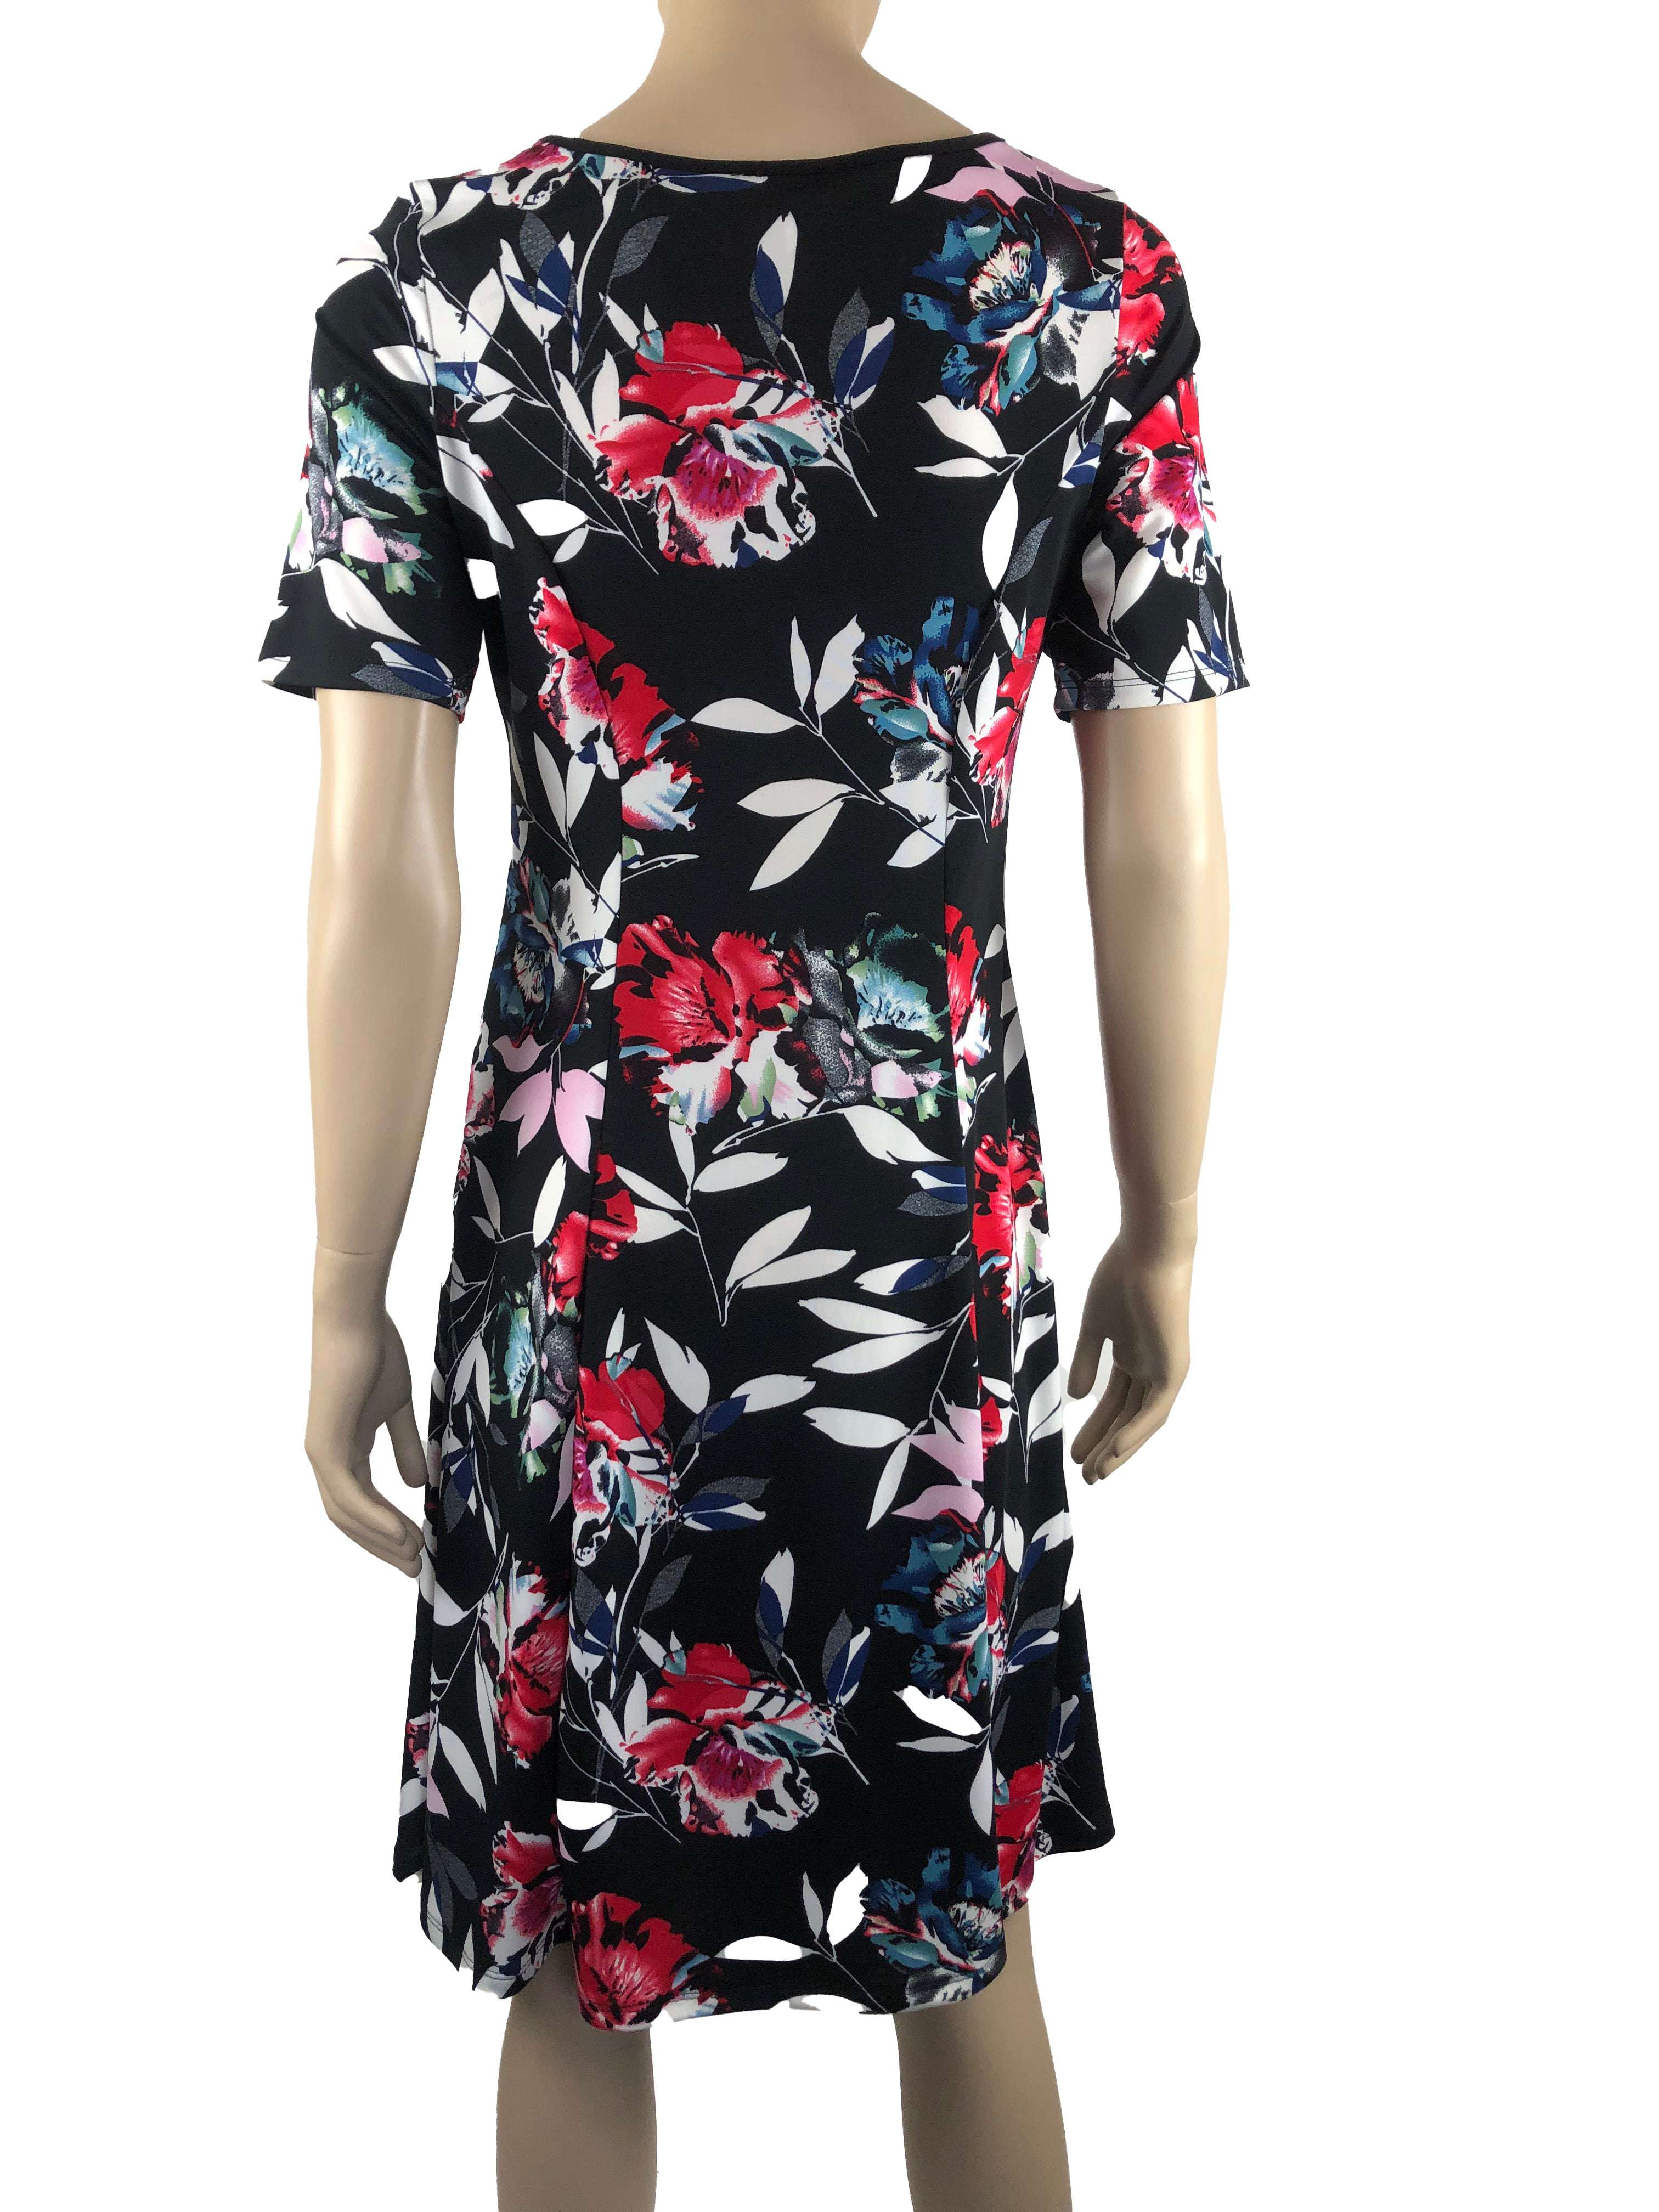 Women's Dresses On Sale Floral Print Flattering Fit Made in Canada - Yvonne Marie - Yvonne Marie